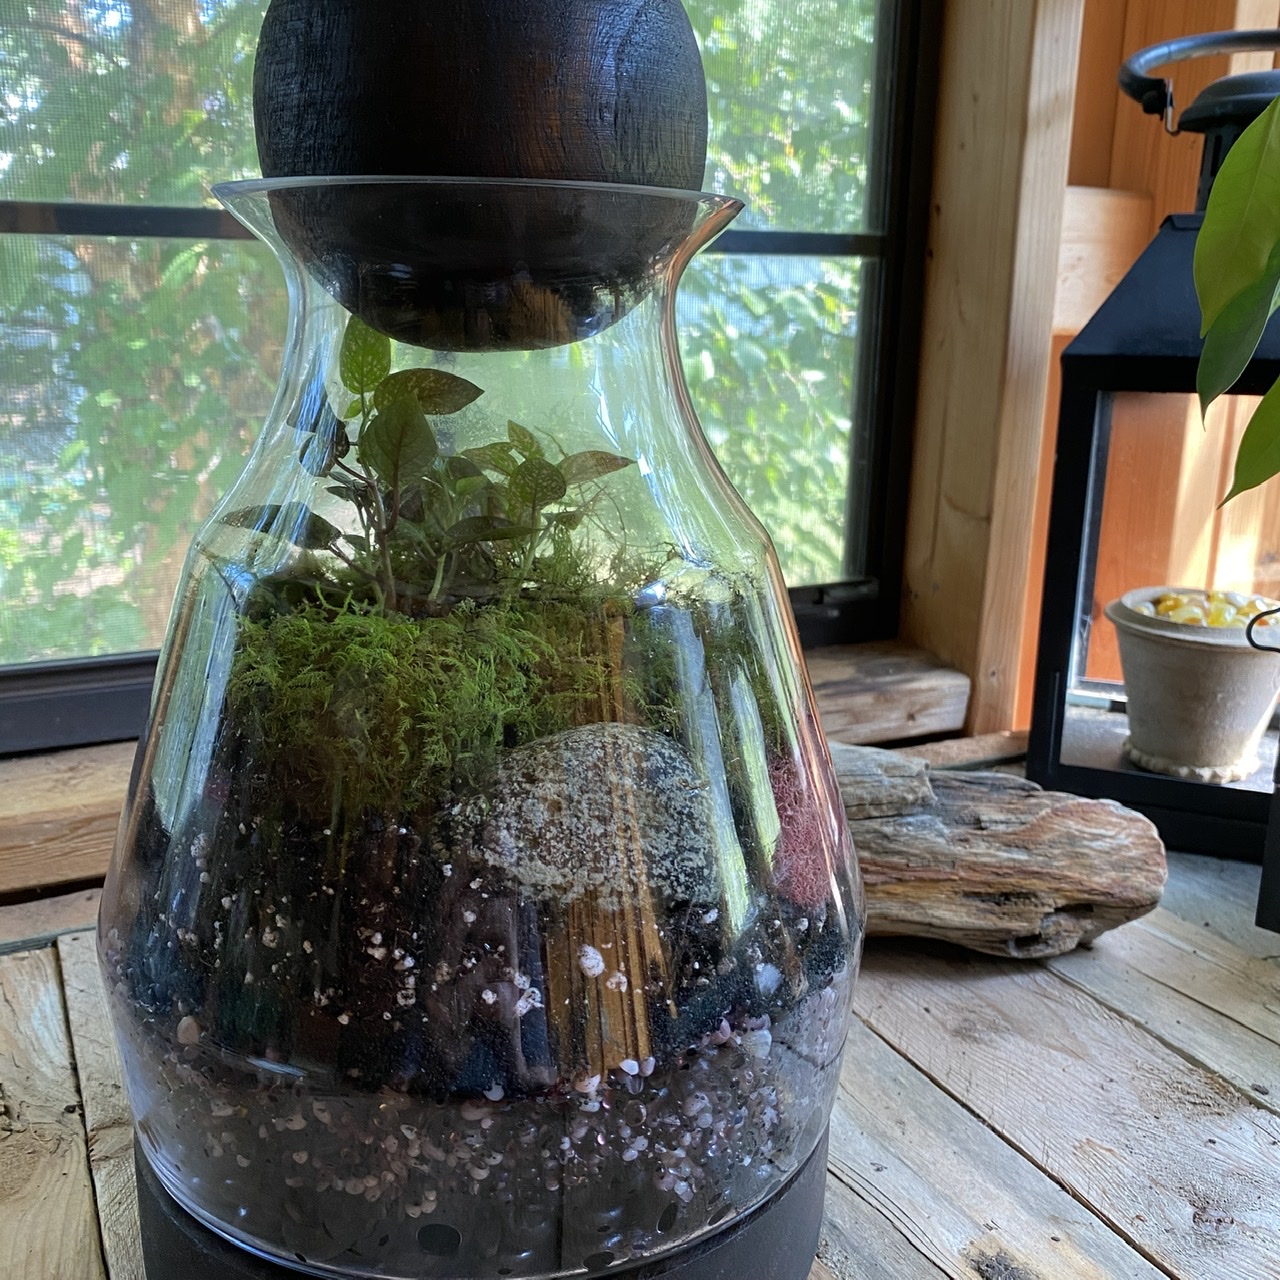 Guide to Terrariums: The Correct Supplies, Plants & More